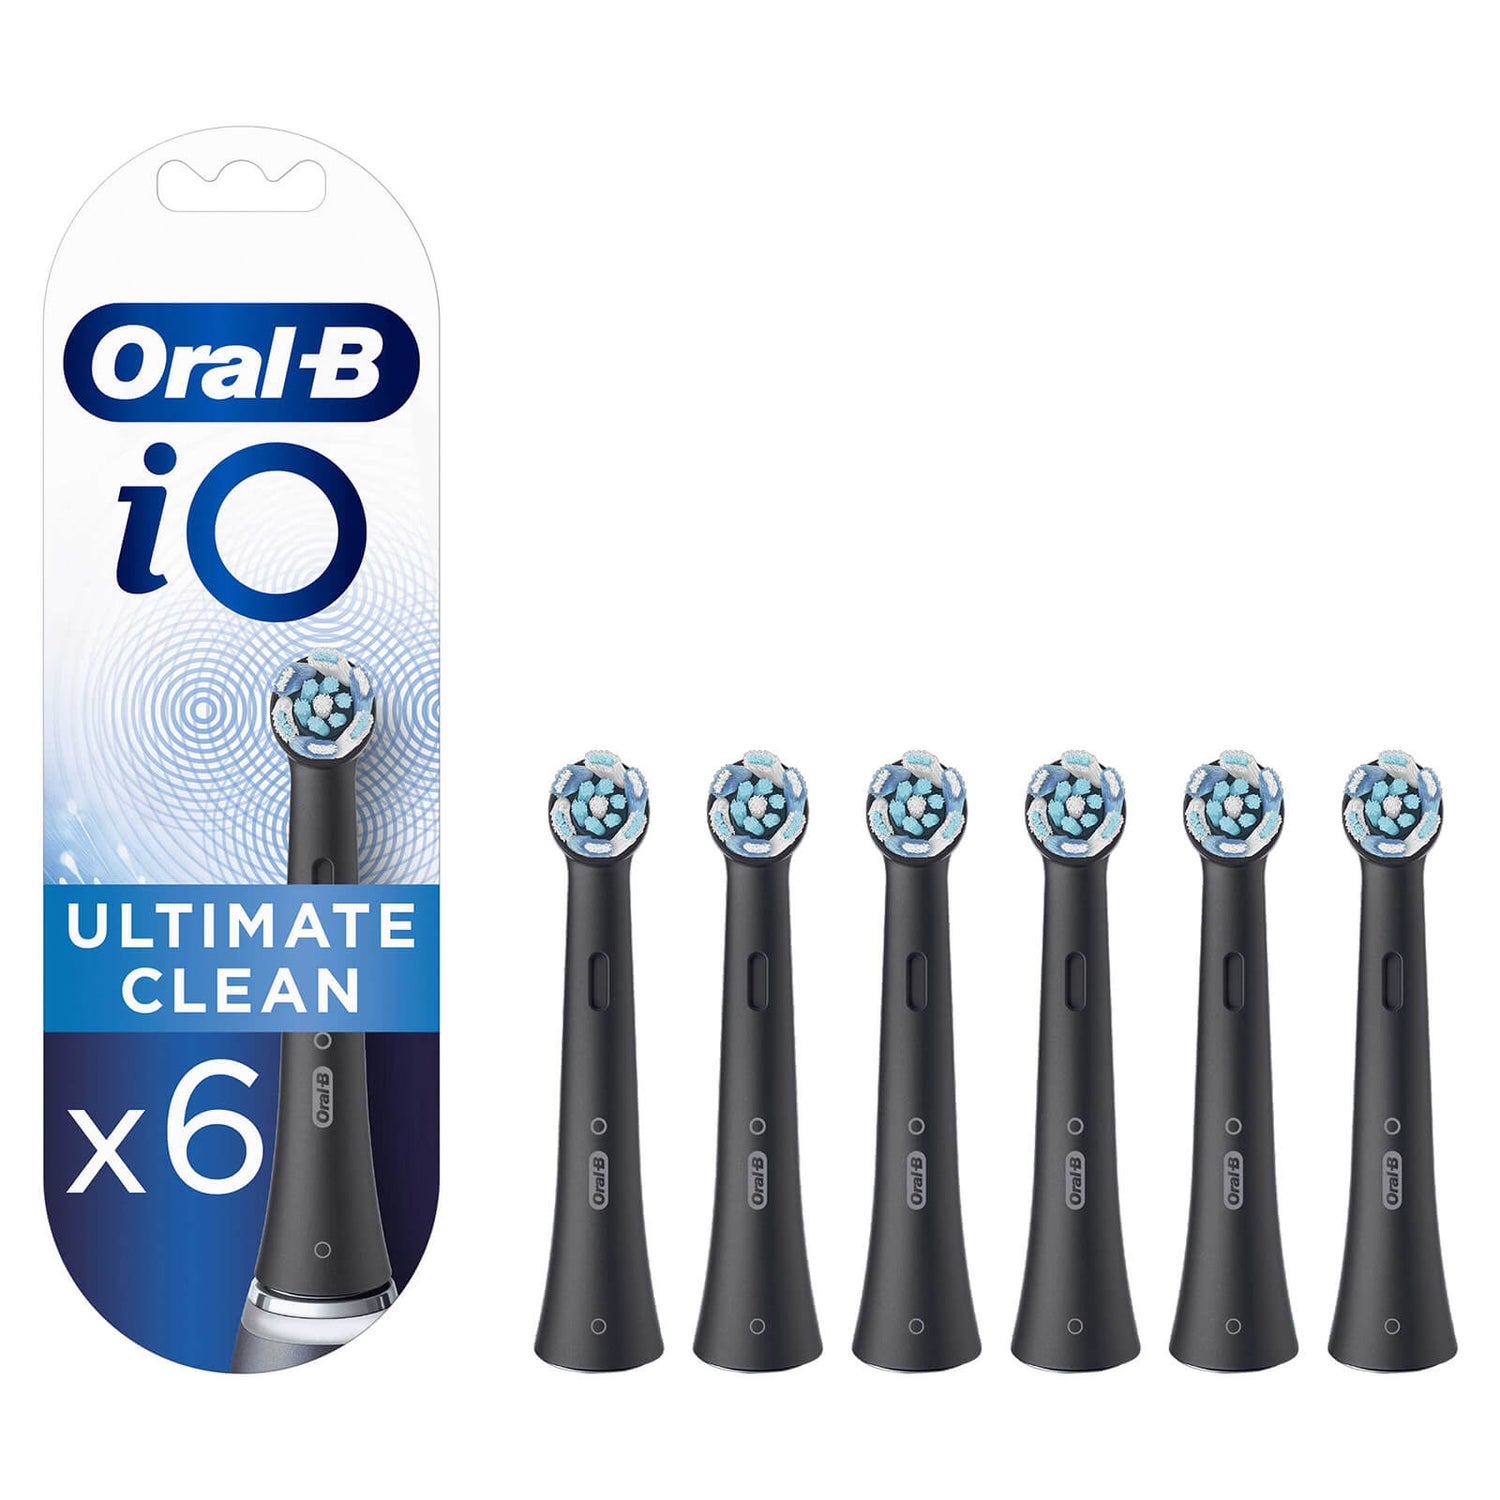 Oral B iO Ultimate Clean Black Brush Heads, 6 Pieces